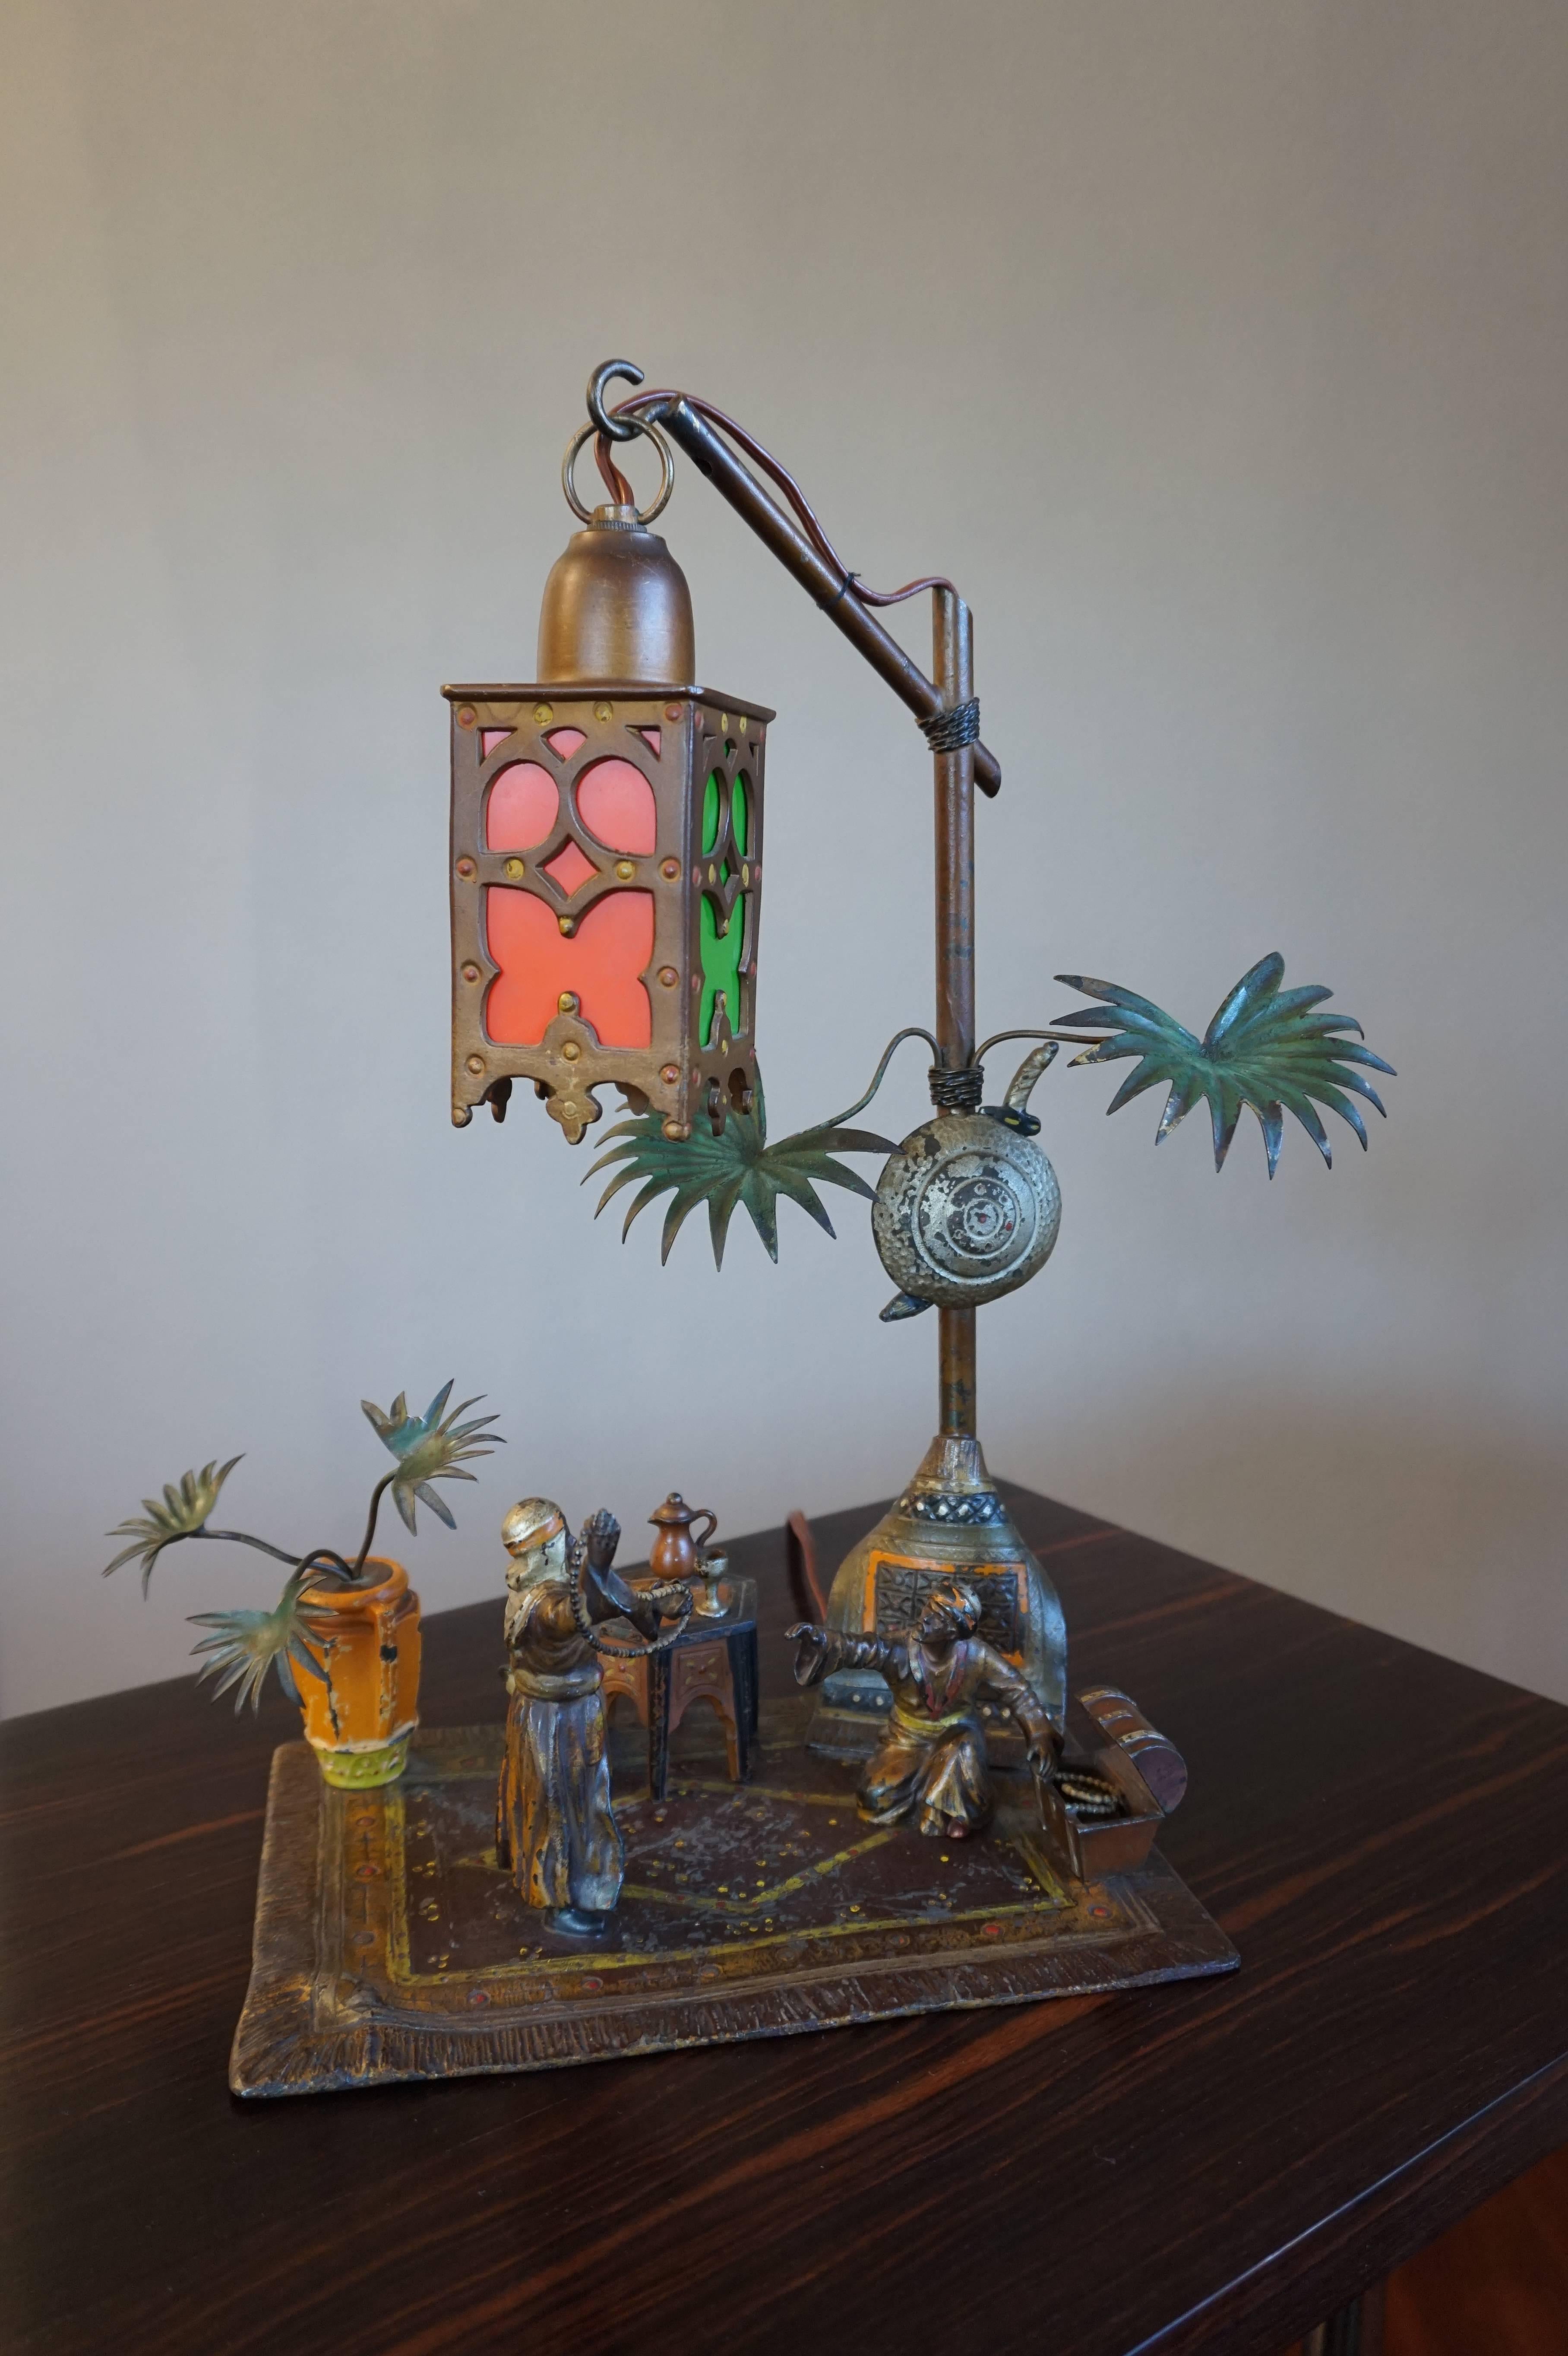 Rare, highly decorative, good size and picturesk Arab table lamp. 

This stylish and entirely handcrafted table lamp from circa 1910 depicts an Arab Merchant and his client. They seem to be negotiating the sale of a necklace, but maybe you see